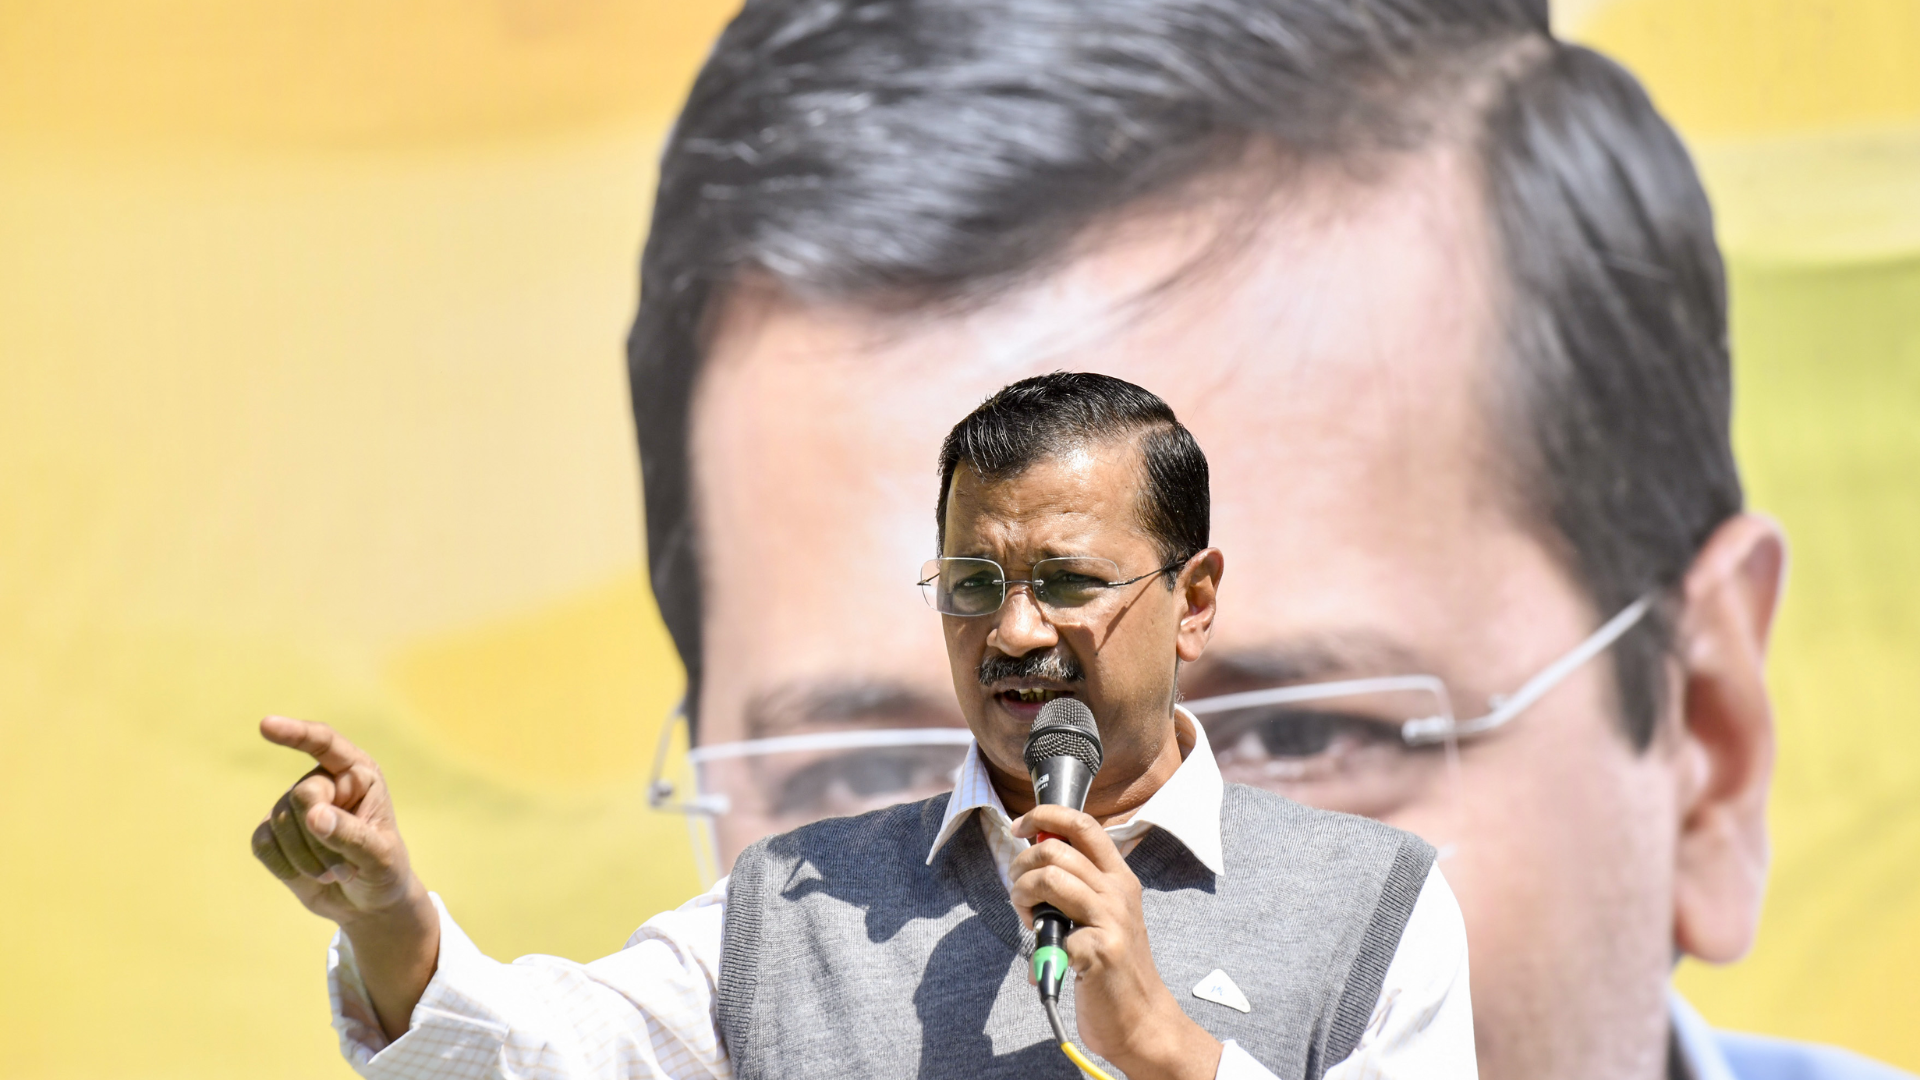 Tihar Officials Report To L-G: Arvind Kejriwal’s Insulin Request Not Recommended or Necessary